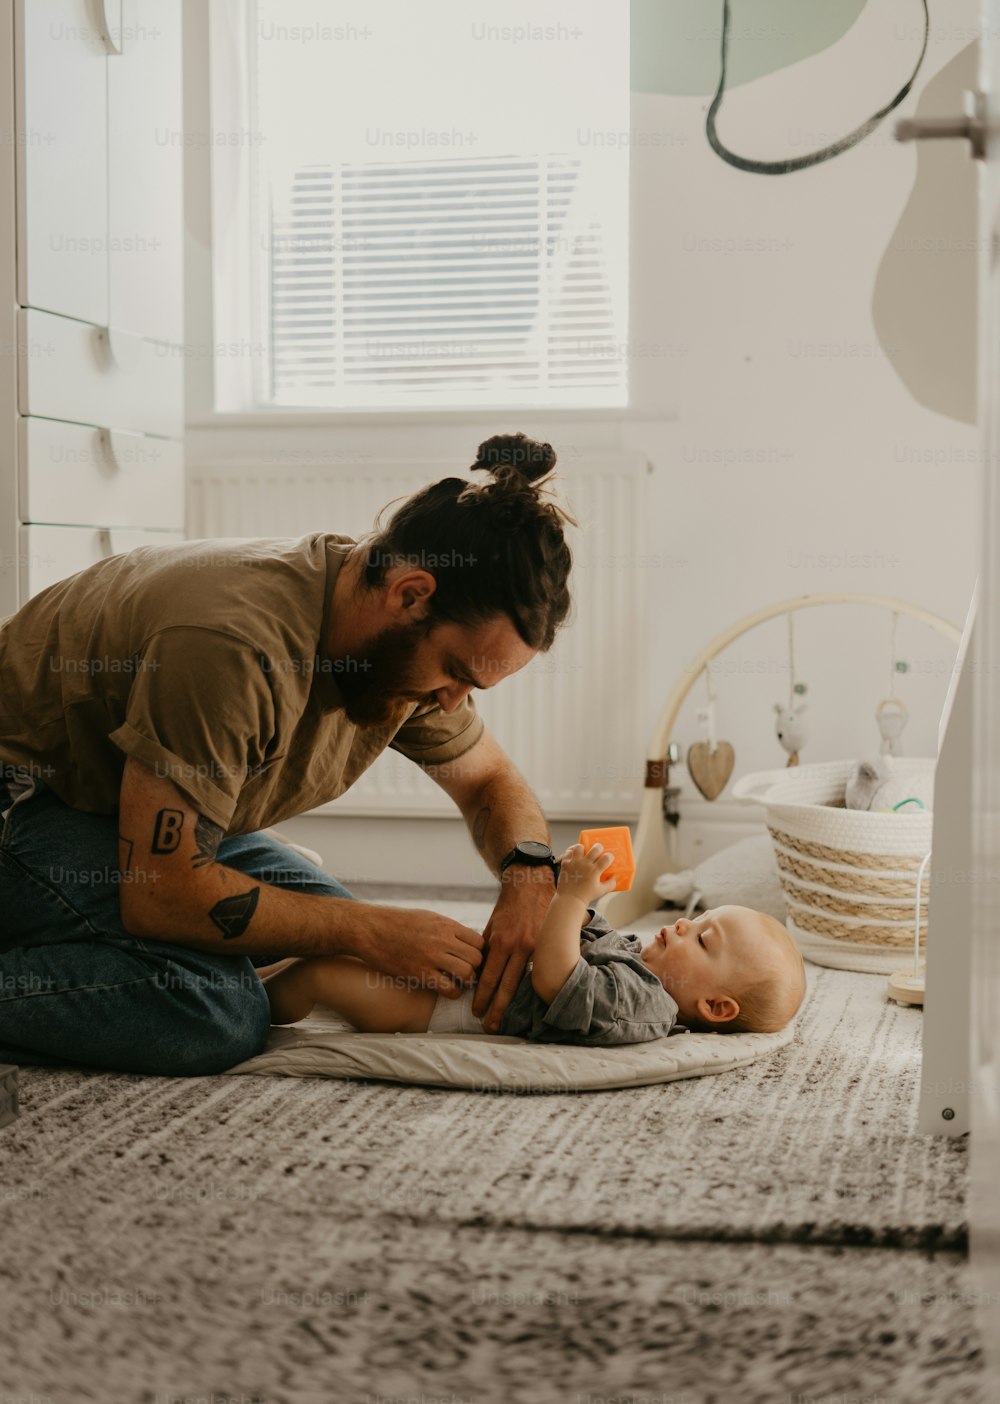 a man is playing with a baby on the floor